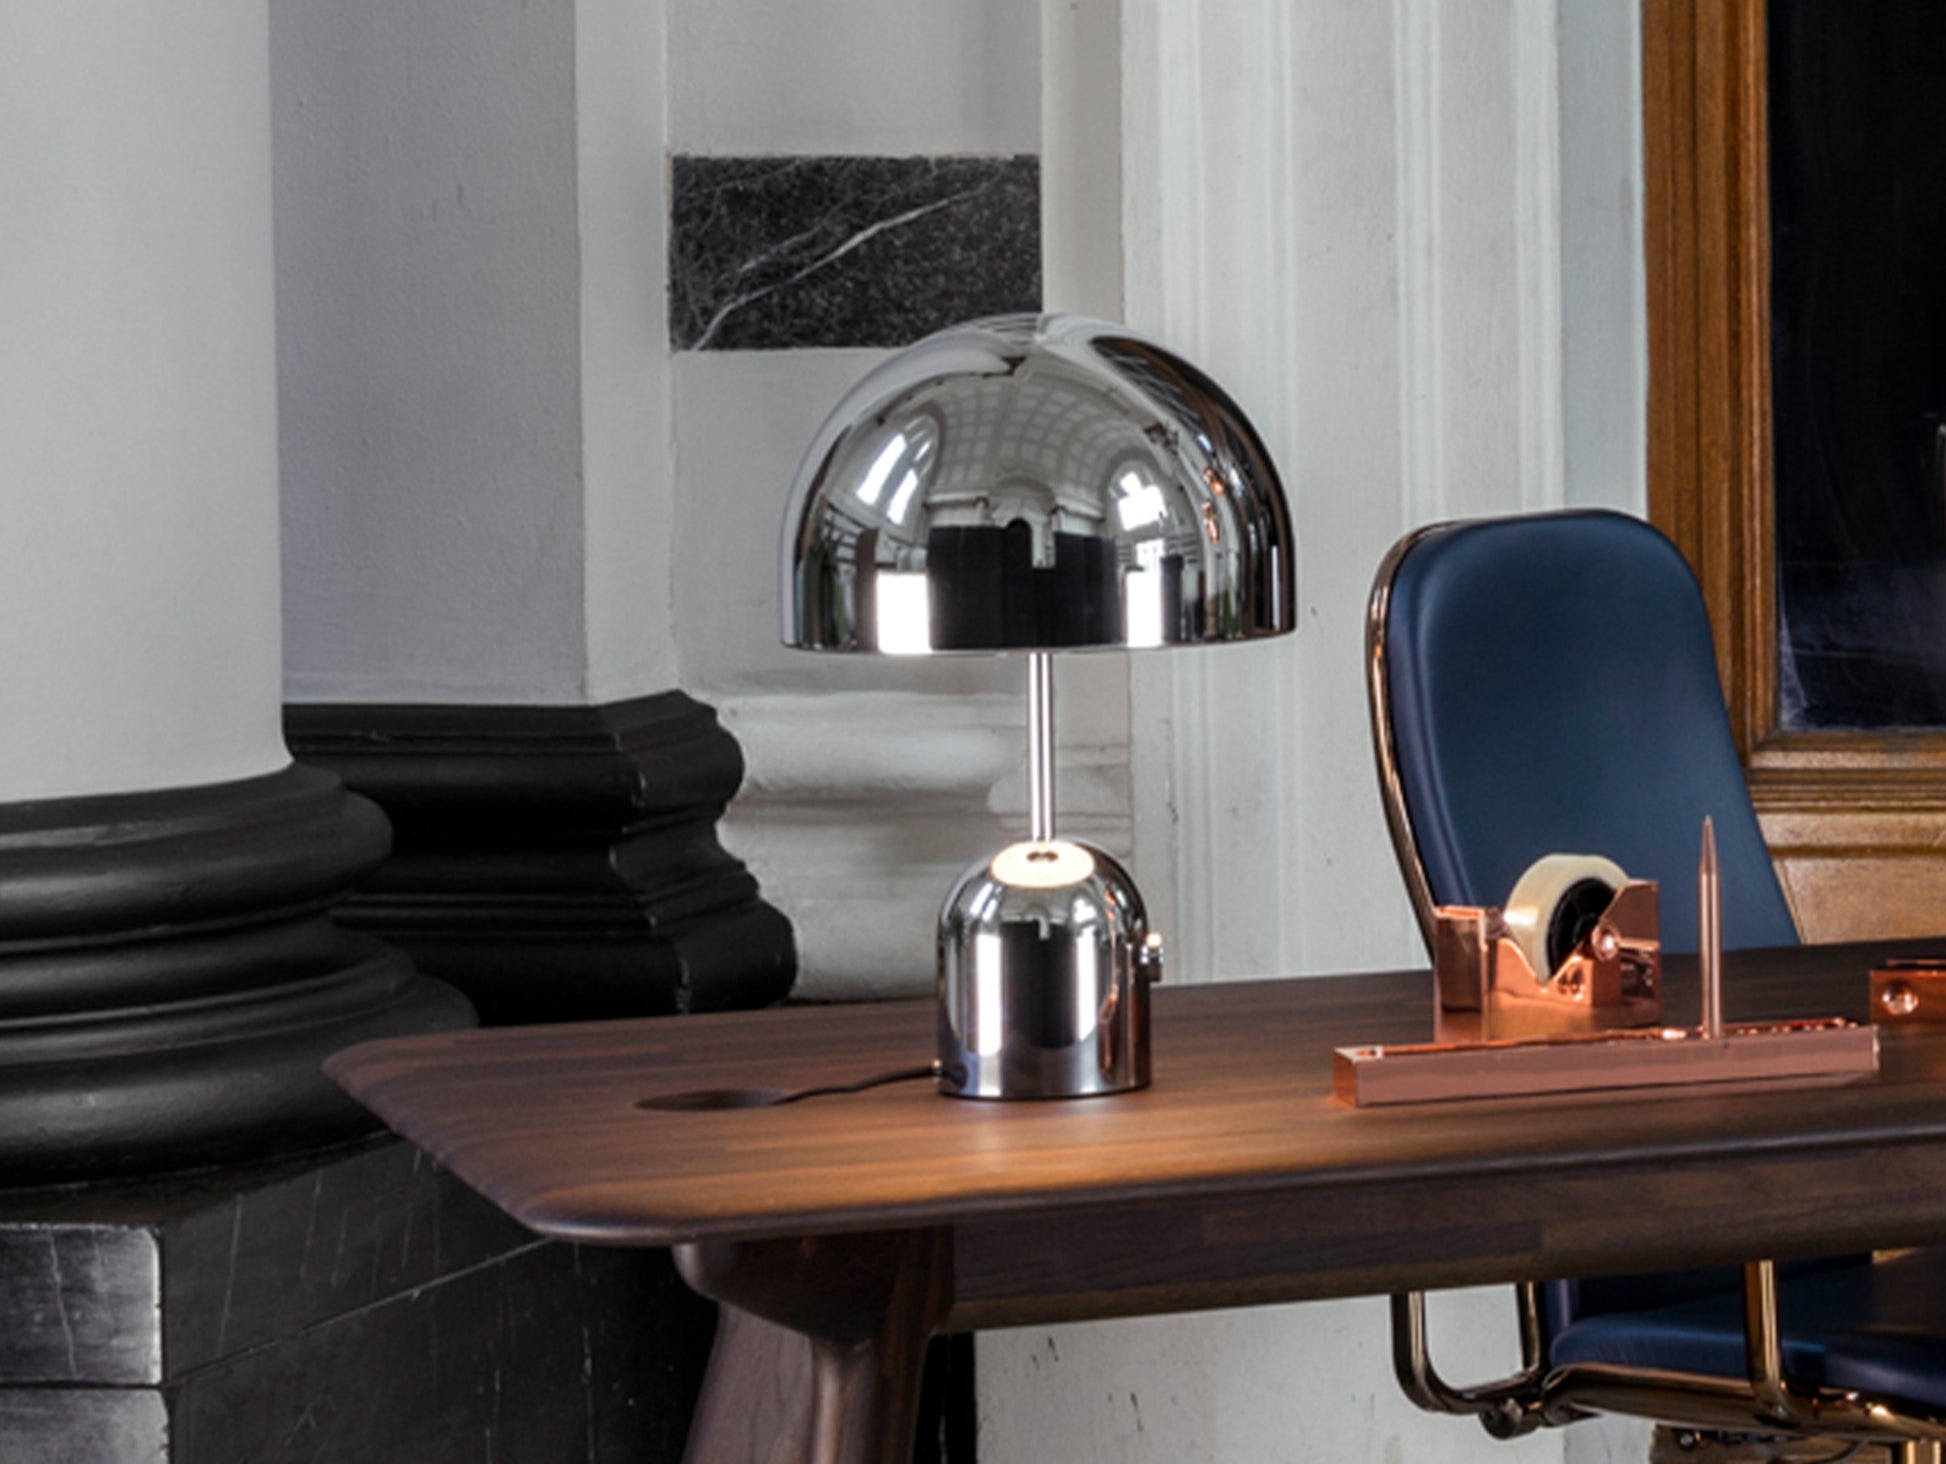 Bell Table Lamp by Tom Dixon - Silver